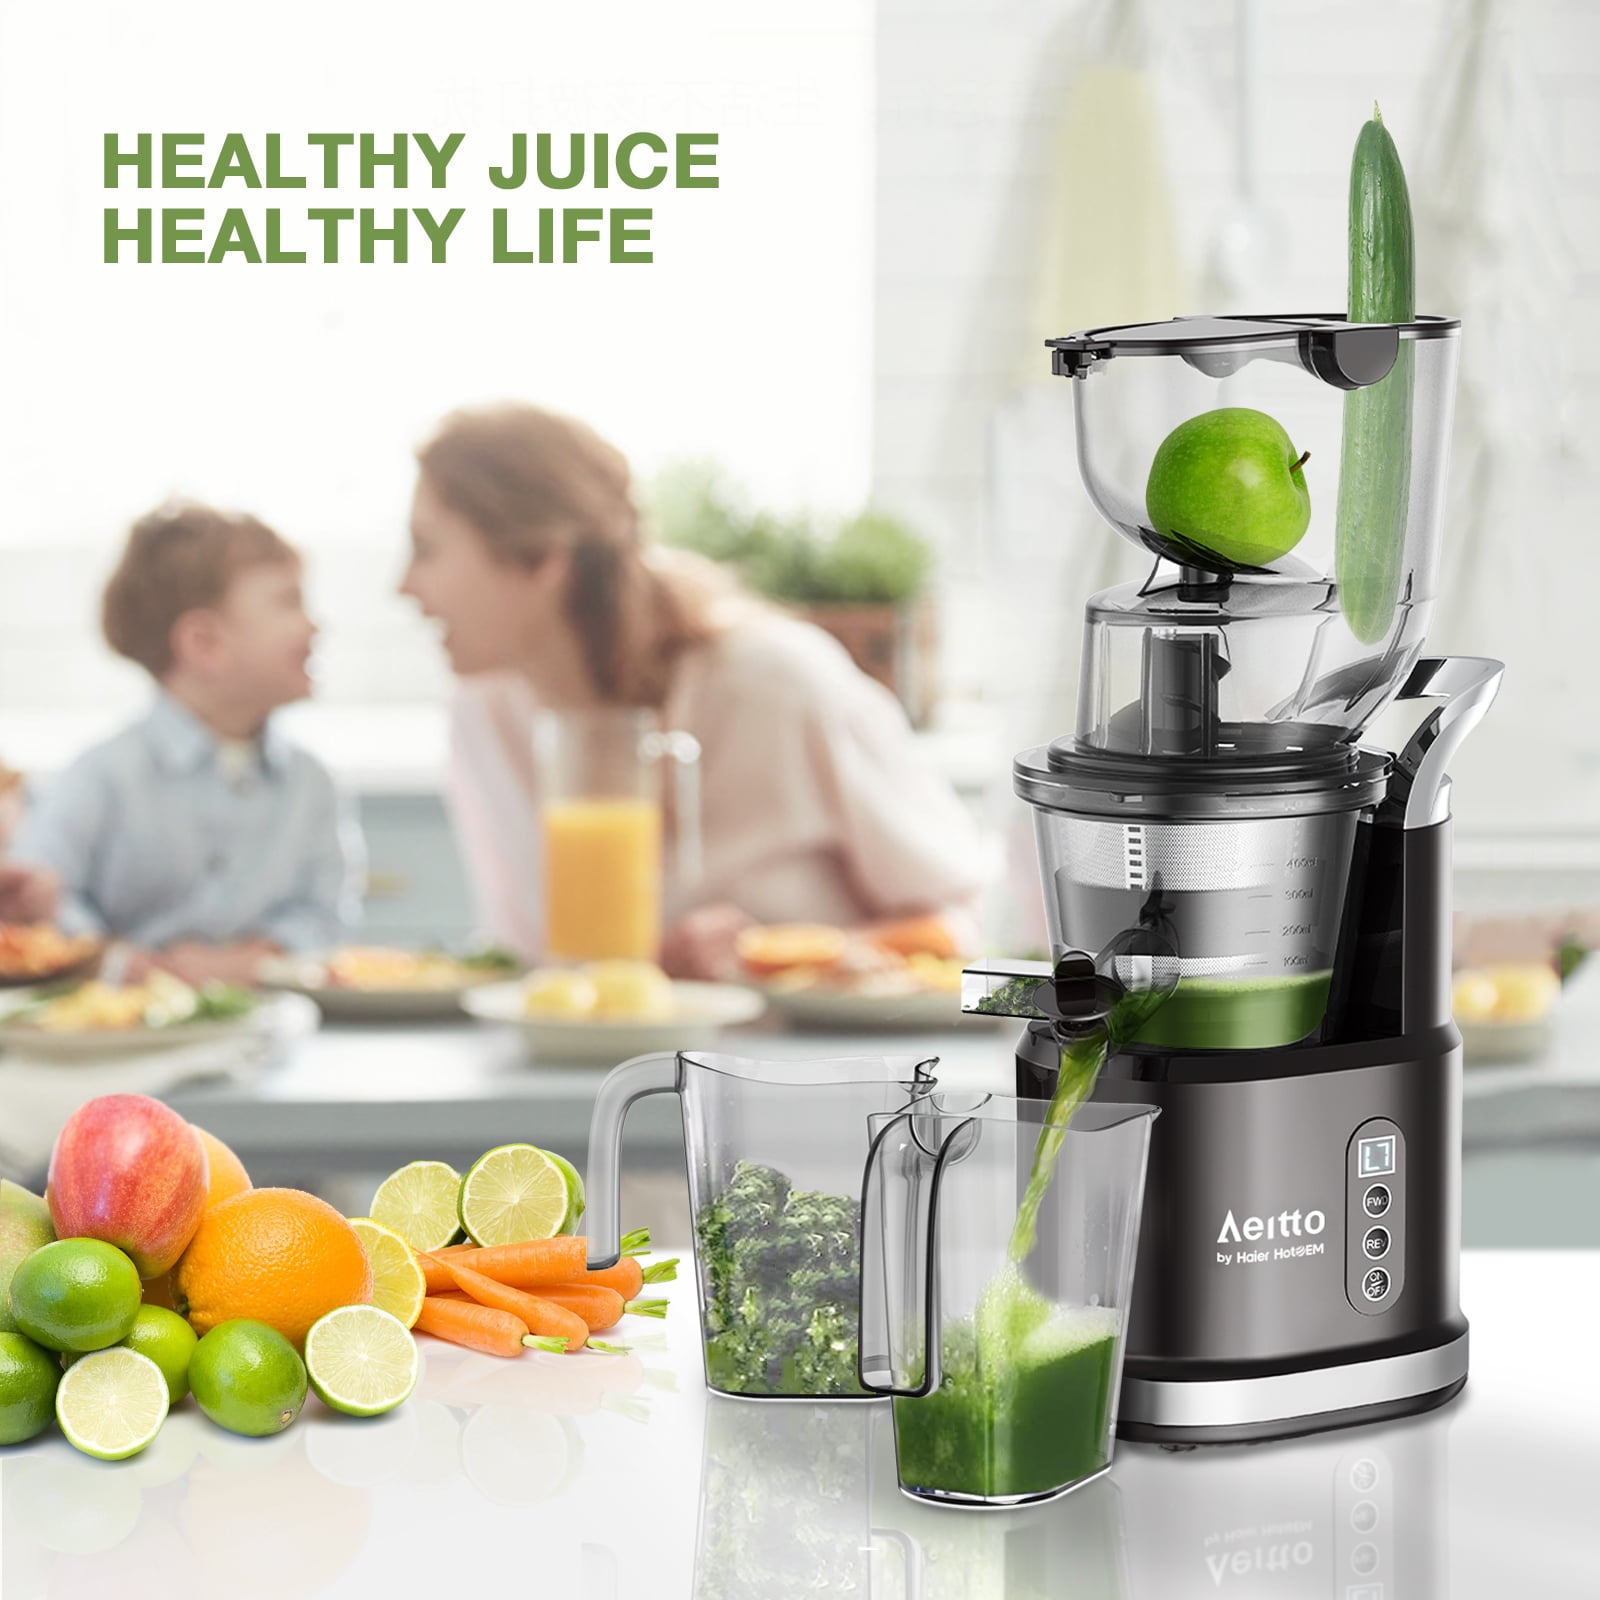 Aeitto Juicer Machine Cold Press Juicer with Big Wide 3.3-in Chute and 900-ml Cup Slow Masticating Juicer Extractor Pro